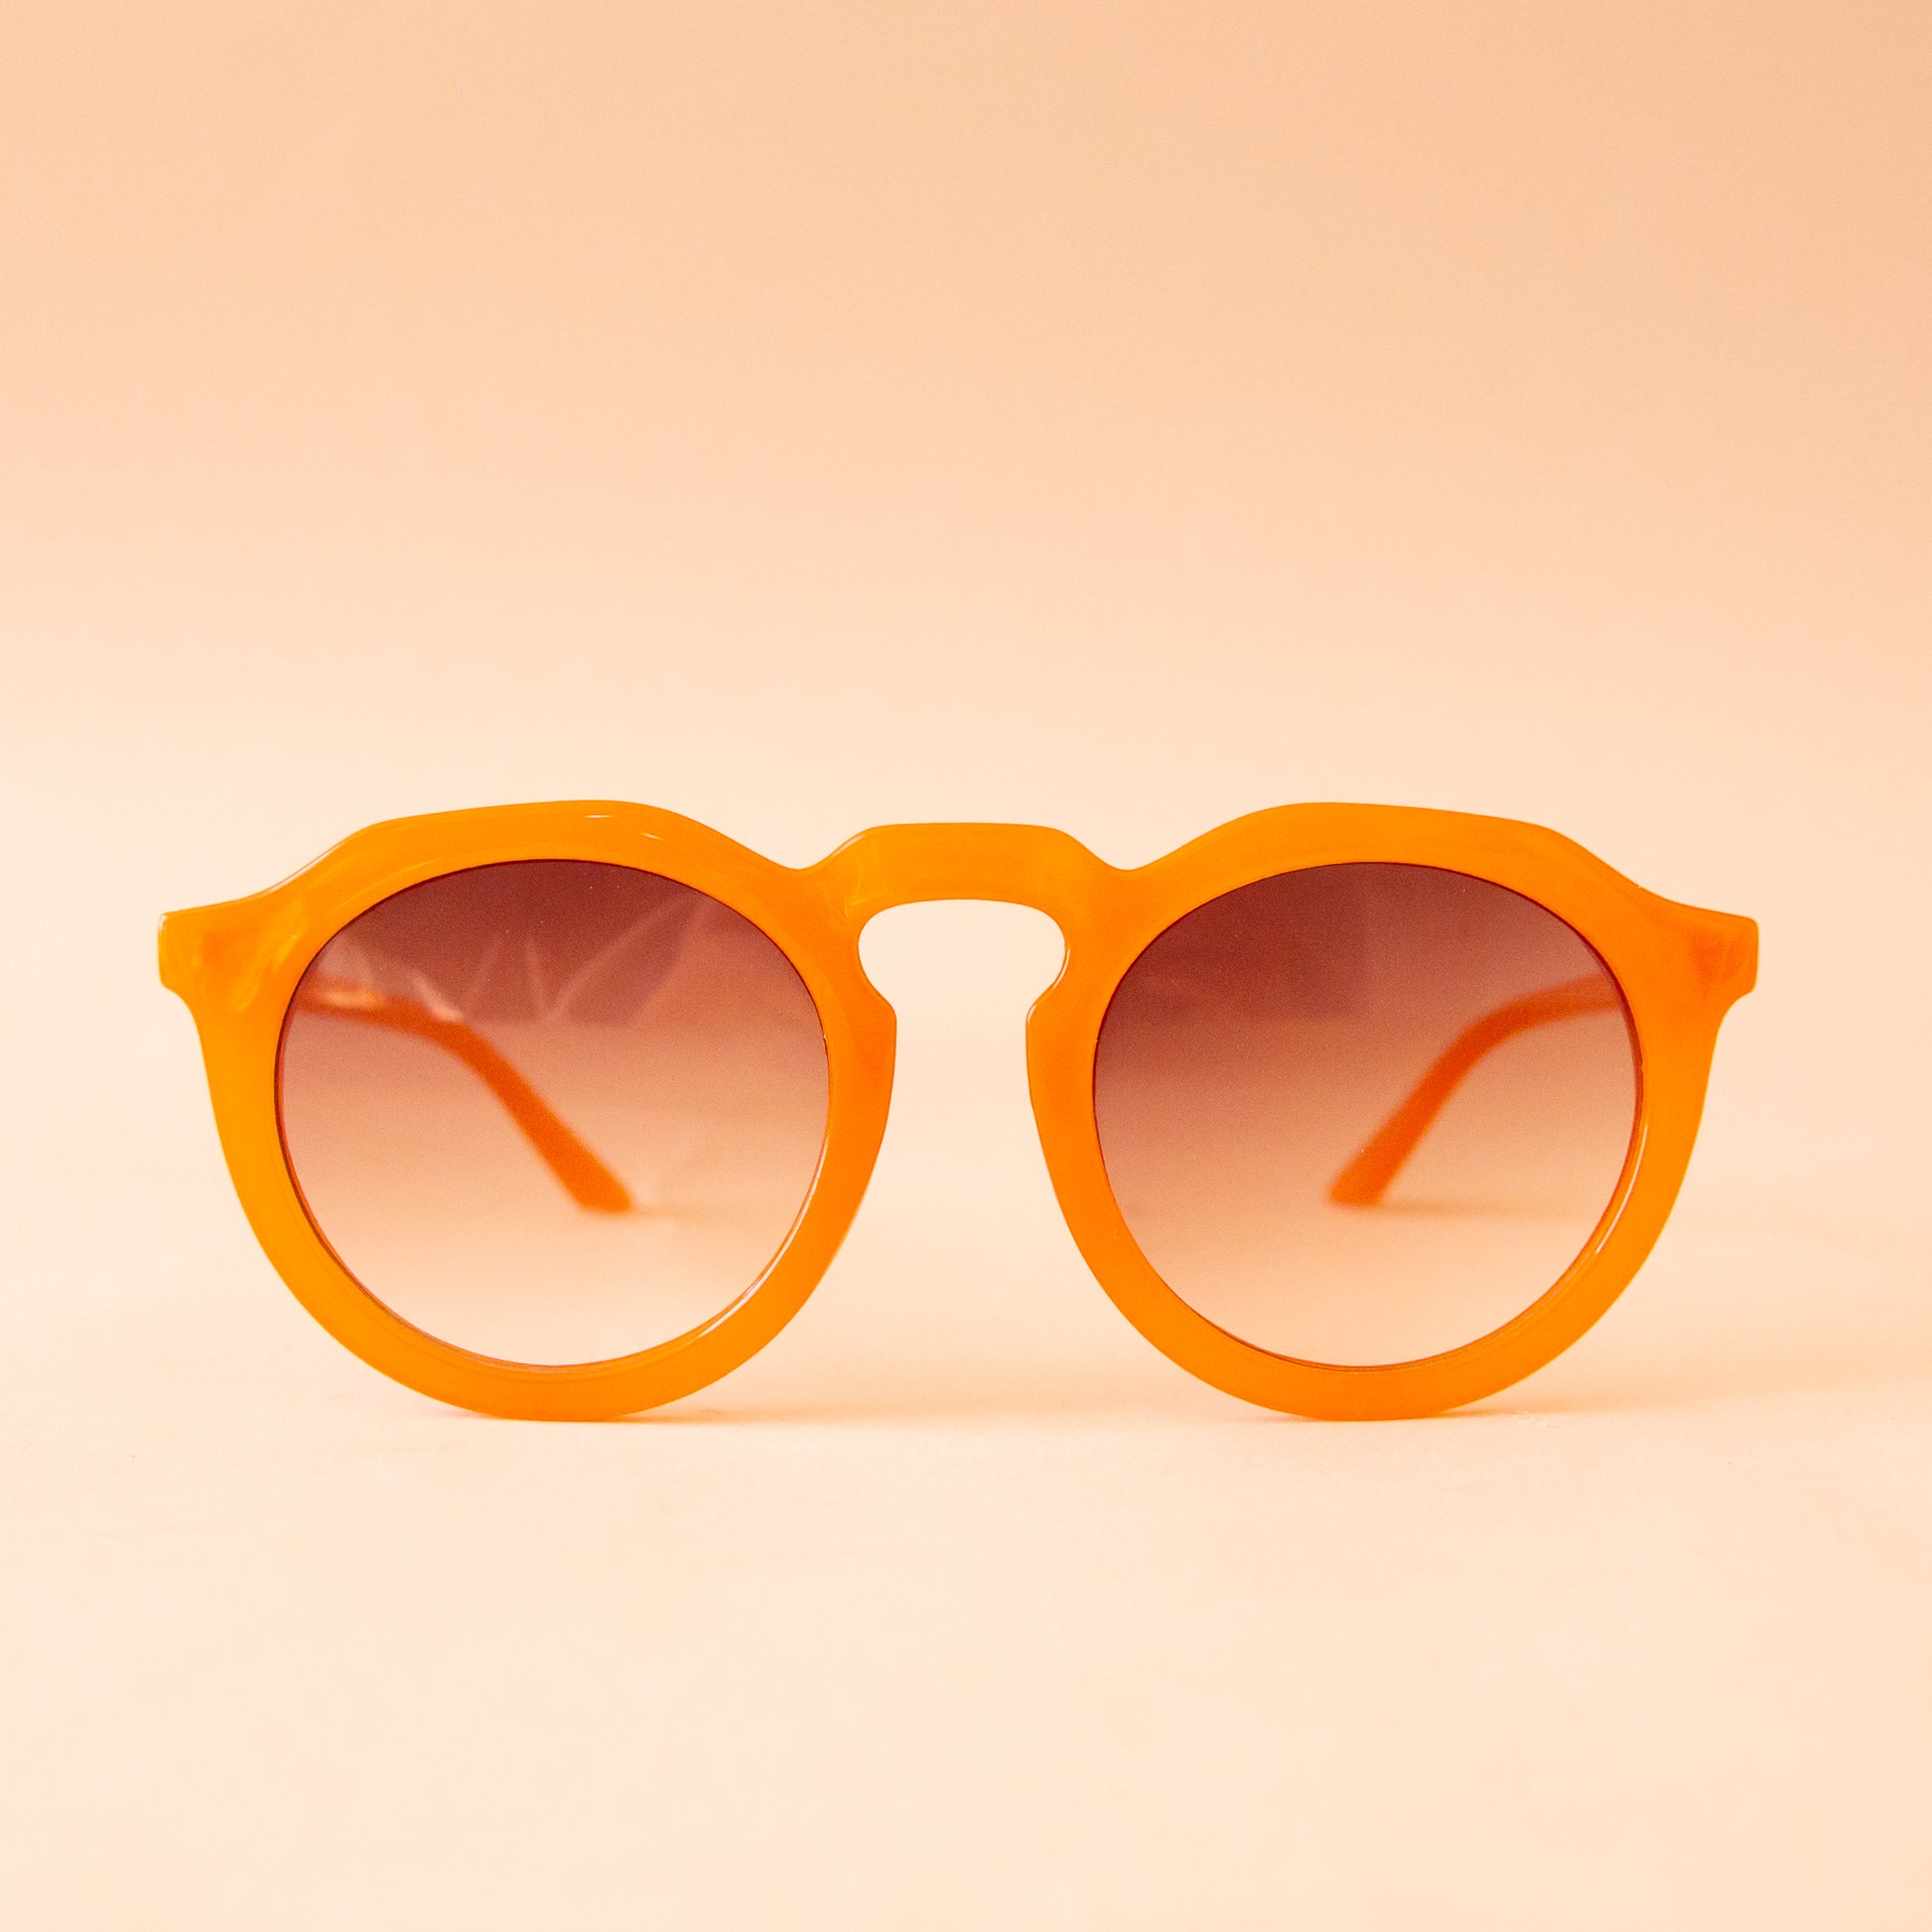 A pair of orange round sunglasses with a brown gradient lens. 